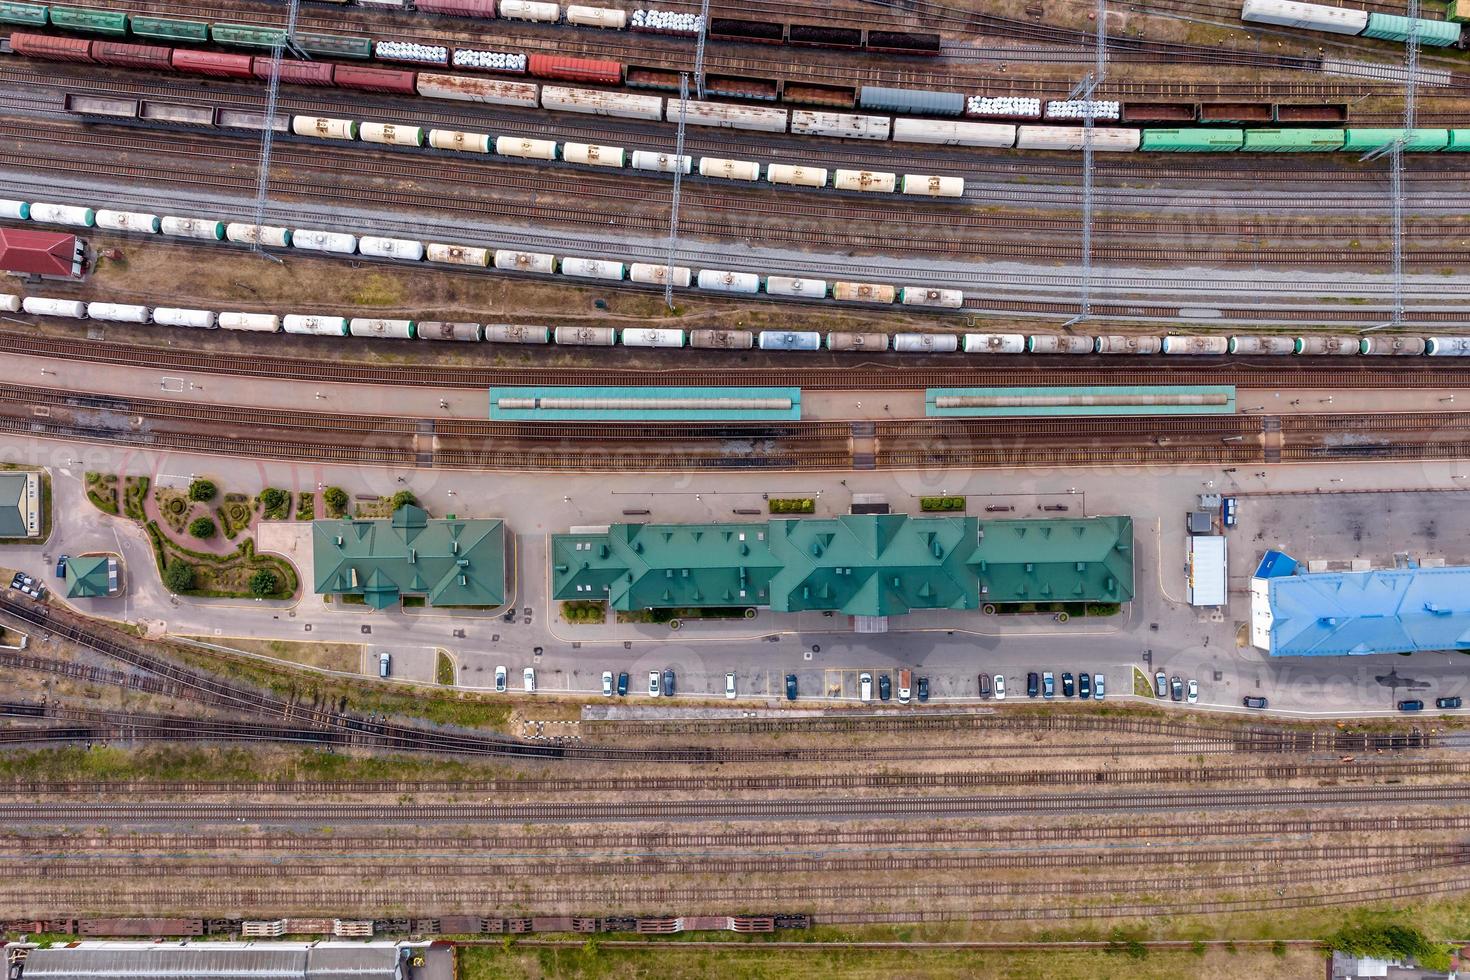 aerial view over long railway freight trains with lots of wagons stand on parking photo